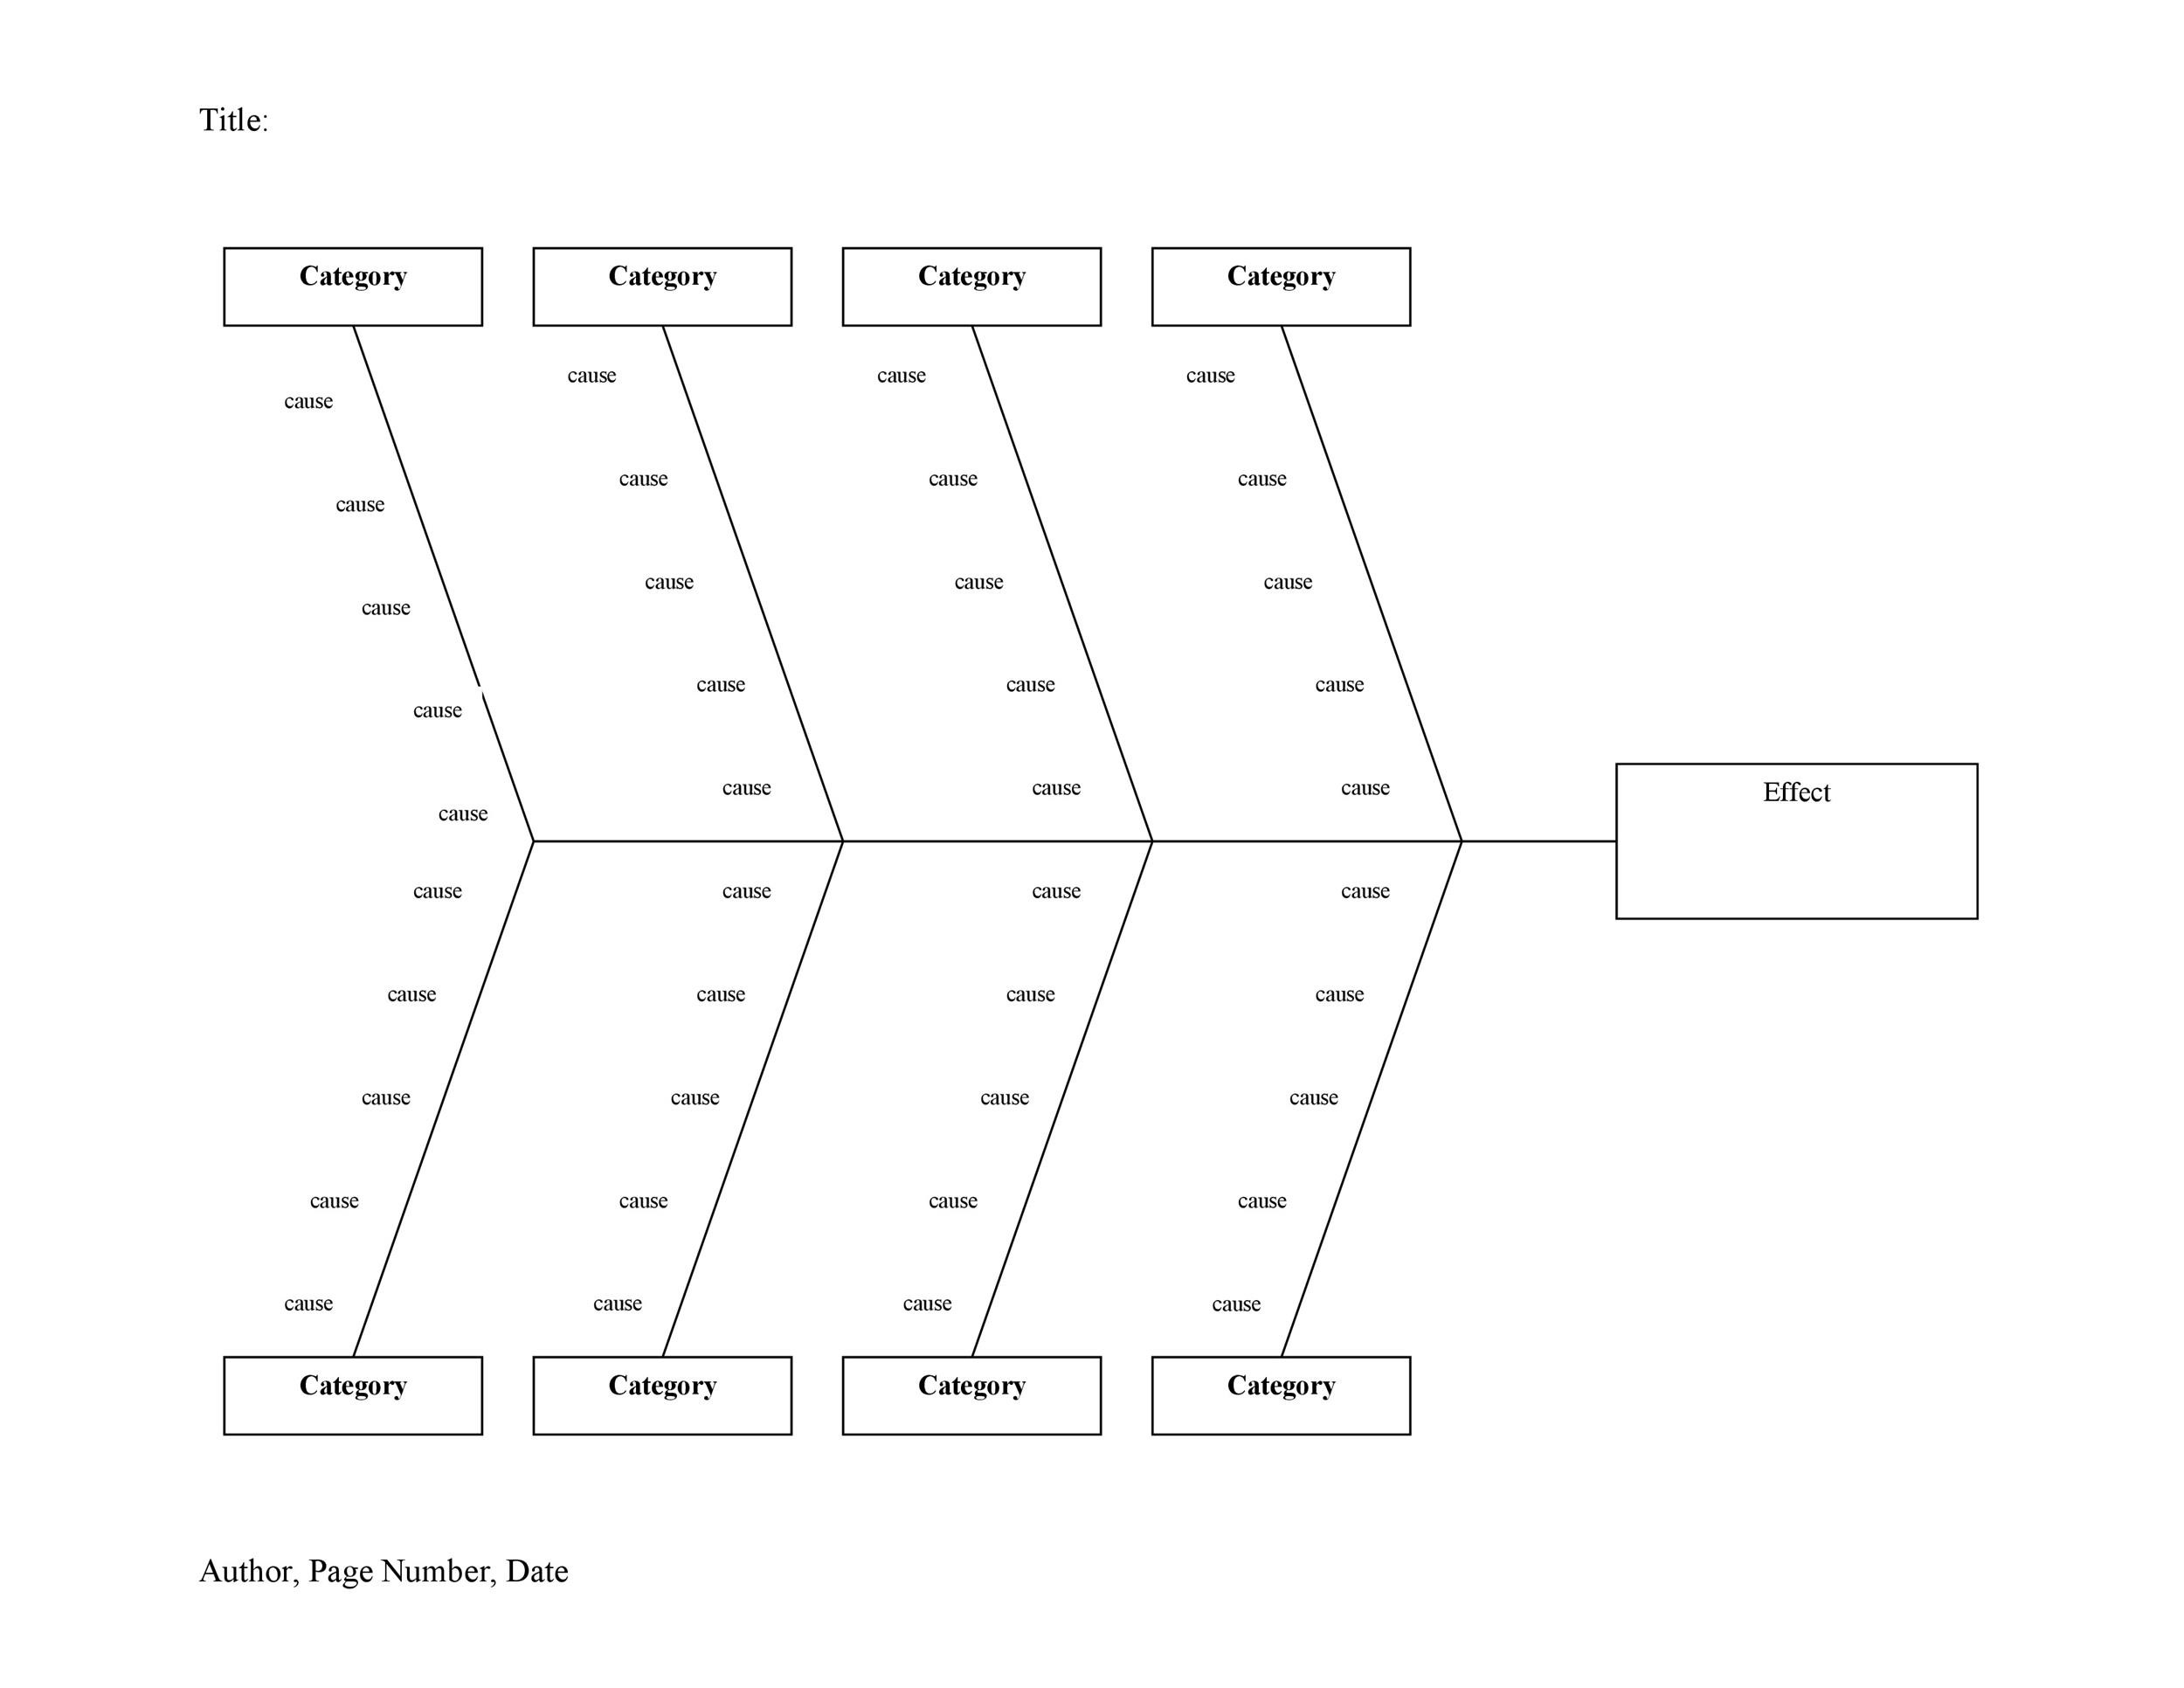 43-great-fishbone-diagram-templates-examples-word-excel